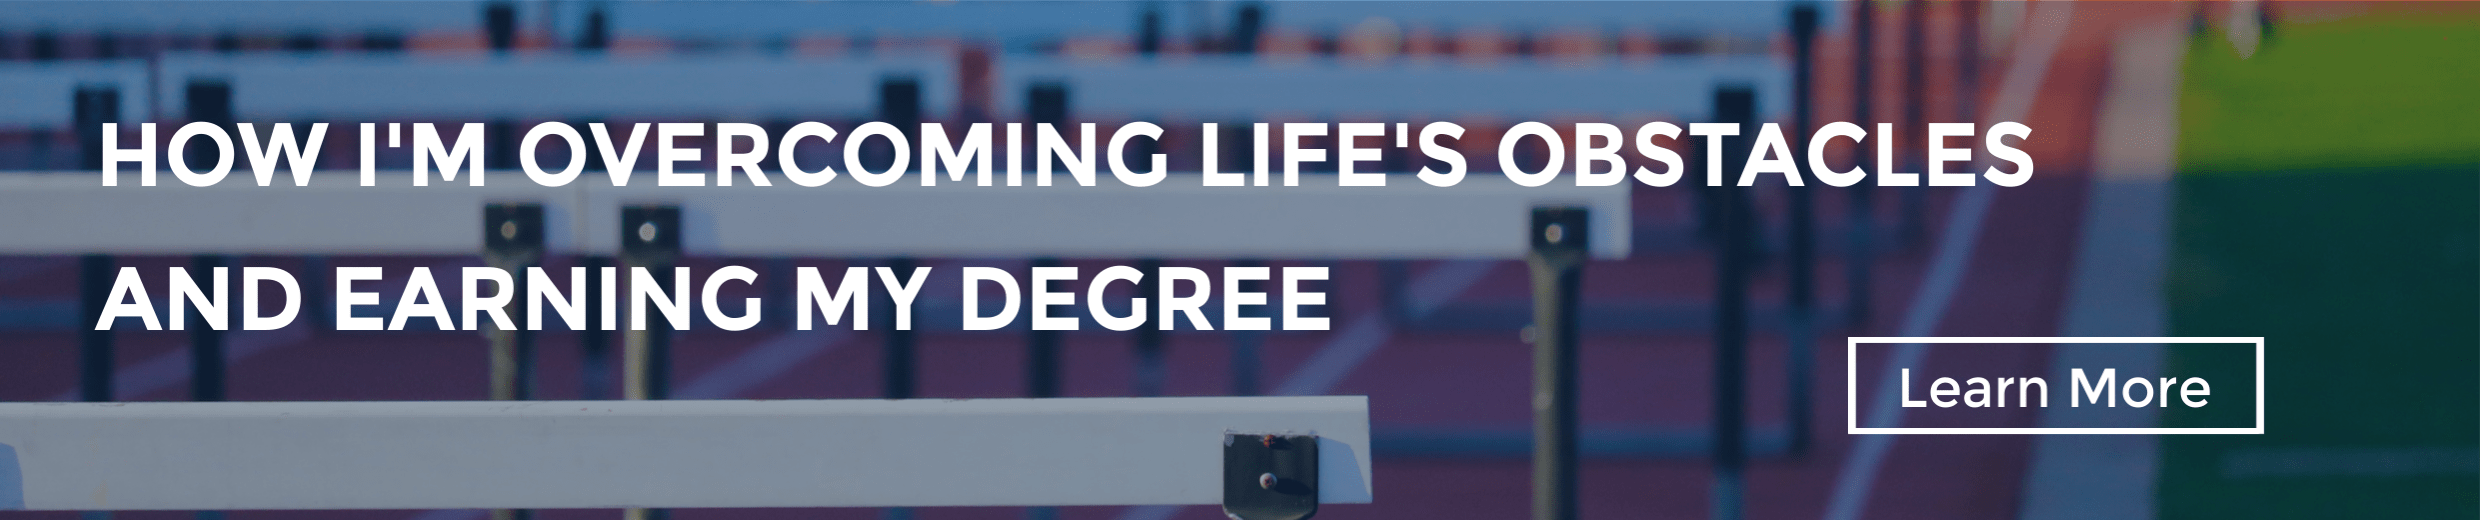 How I'm overcoming life's obstacles and earning my degree